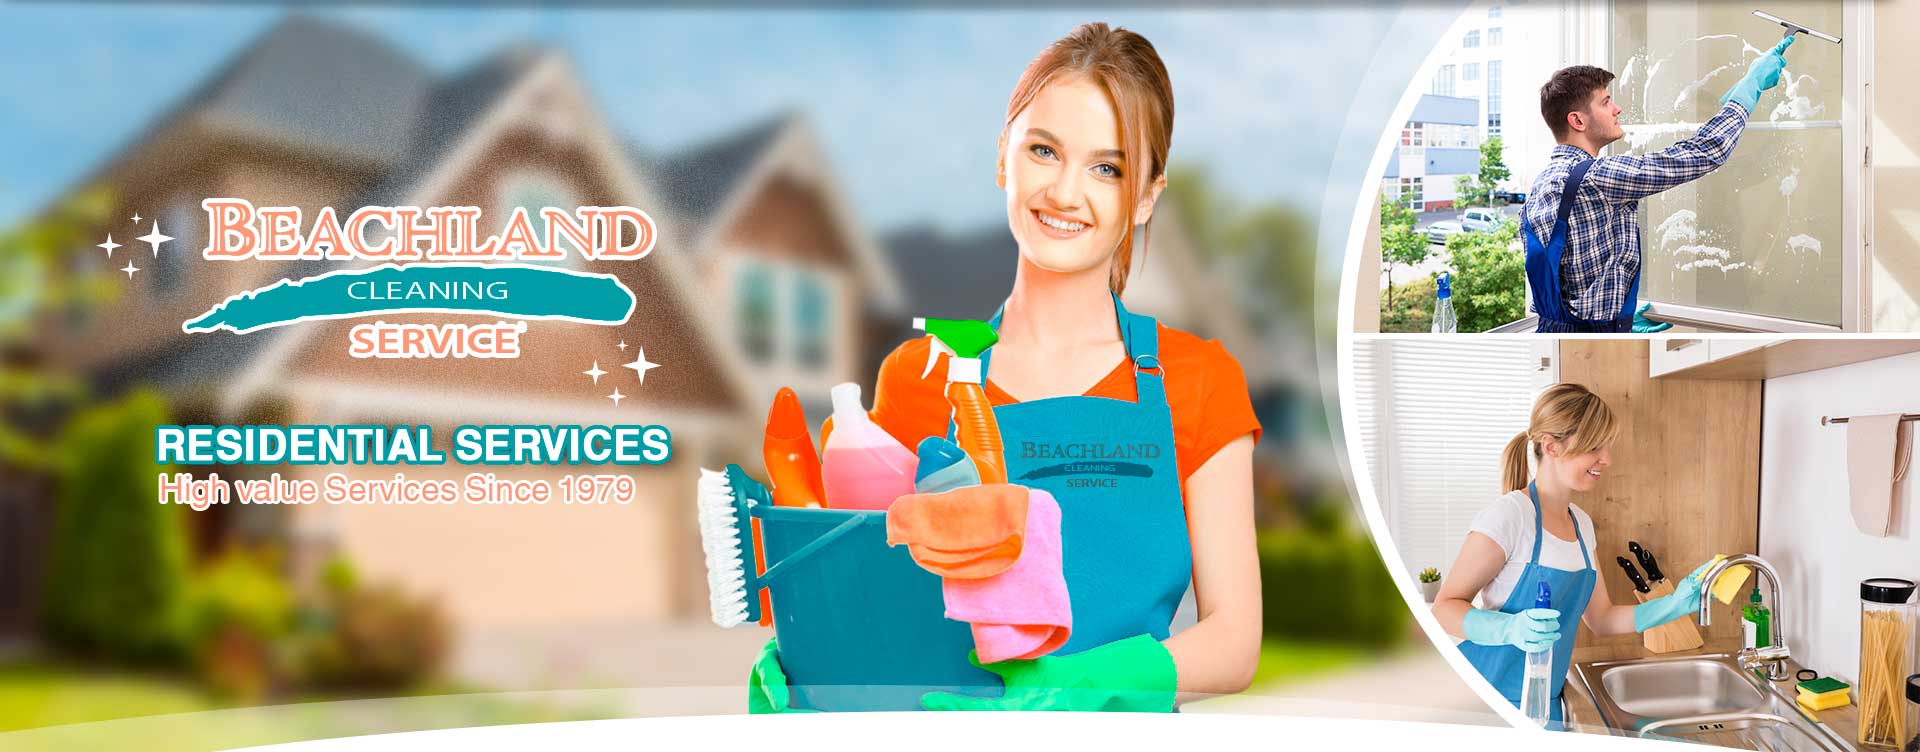 House Cleaning Service in Hobe Sound